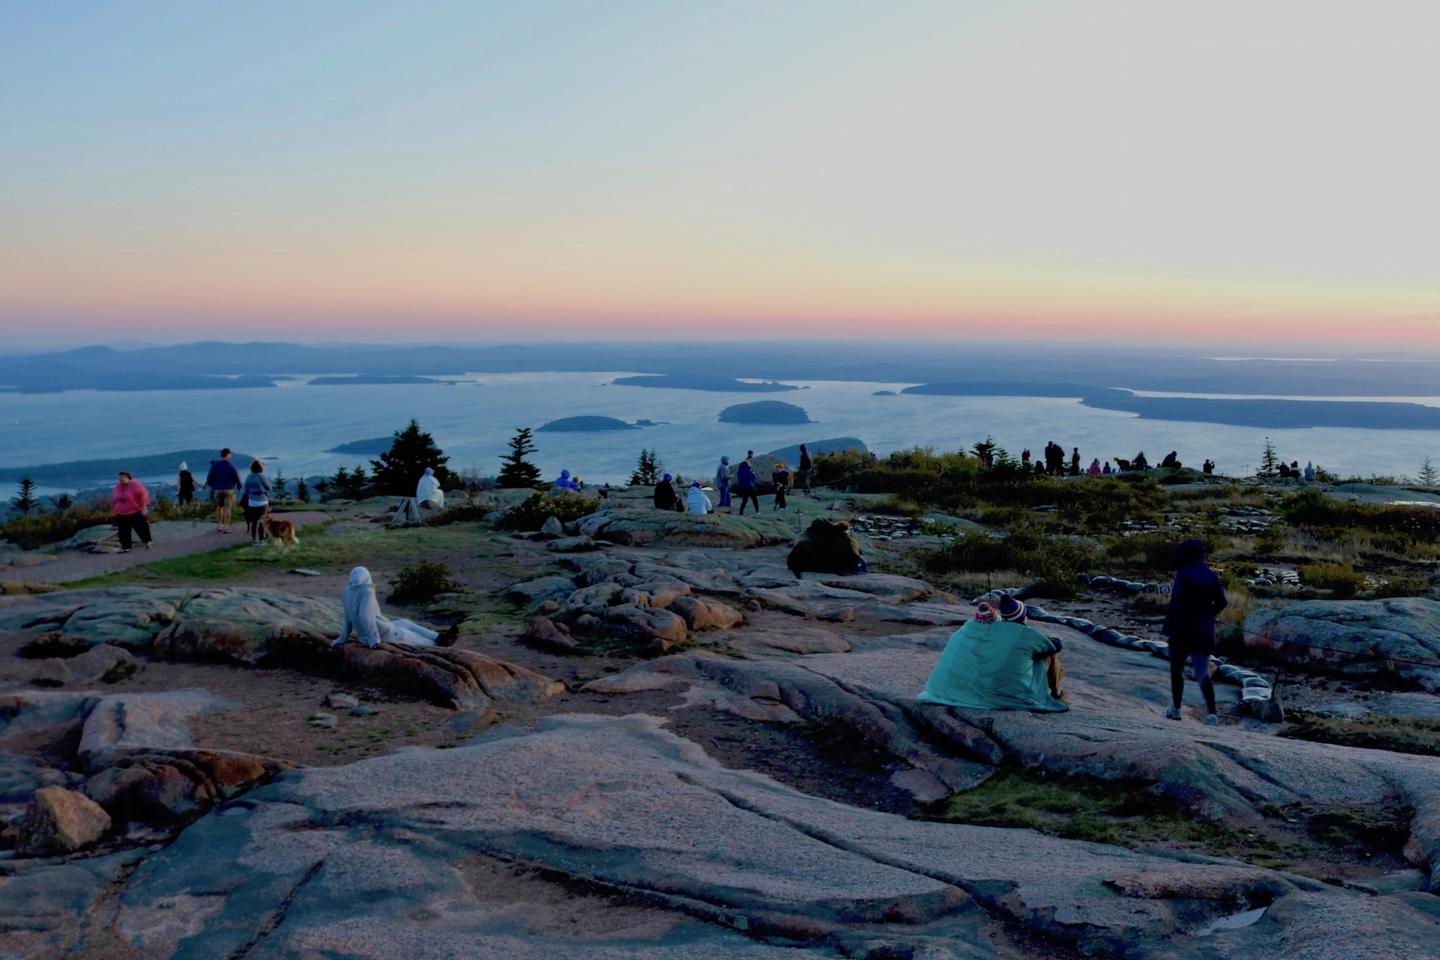 People standing and sitting across granite ledges on top of Cadillac Mountain viewing sunrise with a bay spotted with islands in the background below.Sunrise on Cadillac Mountain.